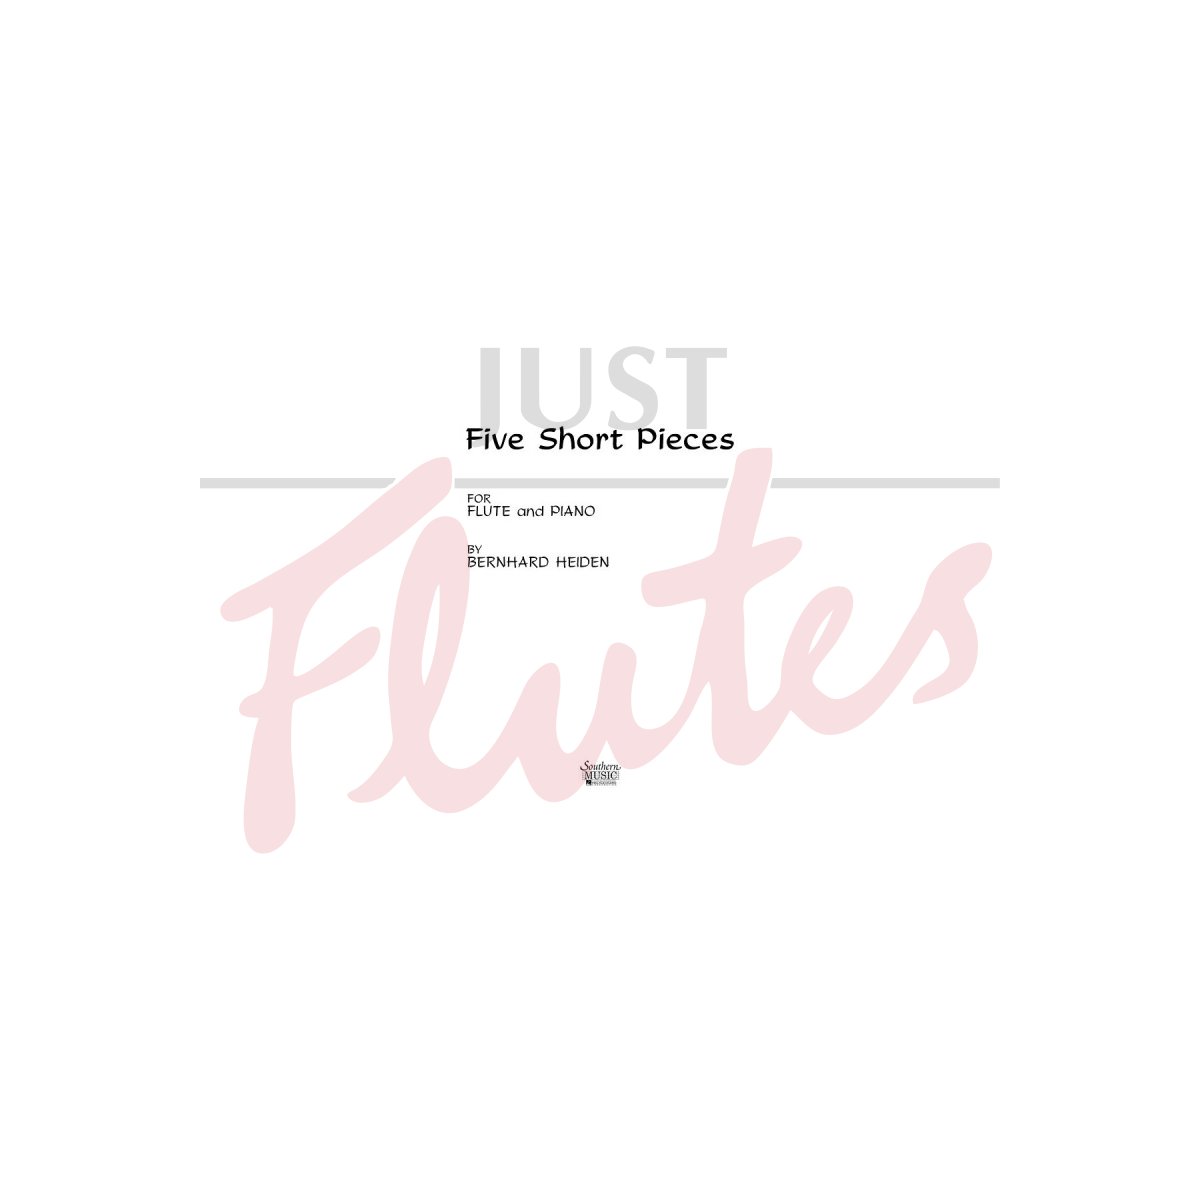 Five Short Pieces for Flute and Piano